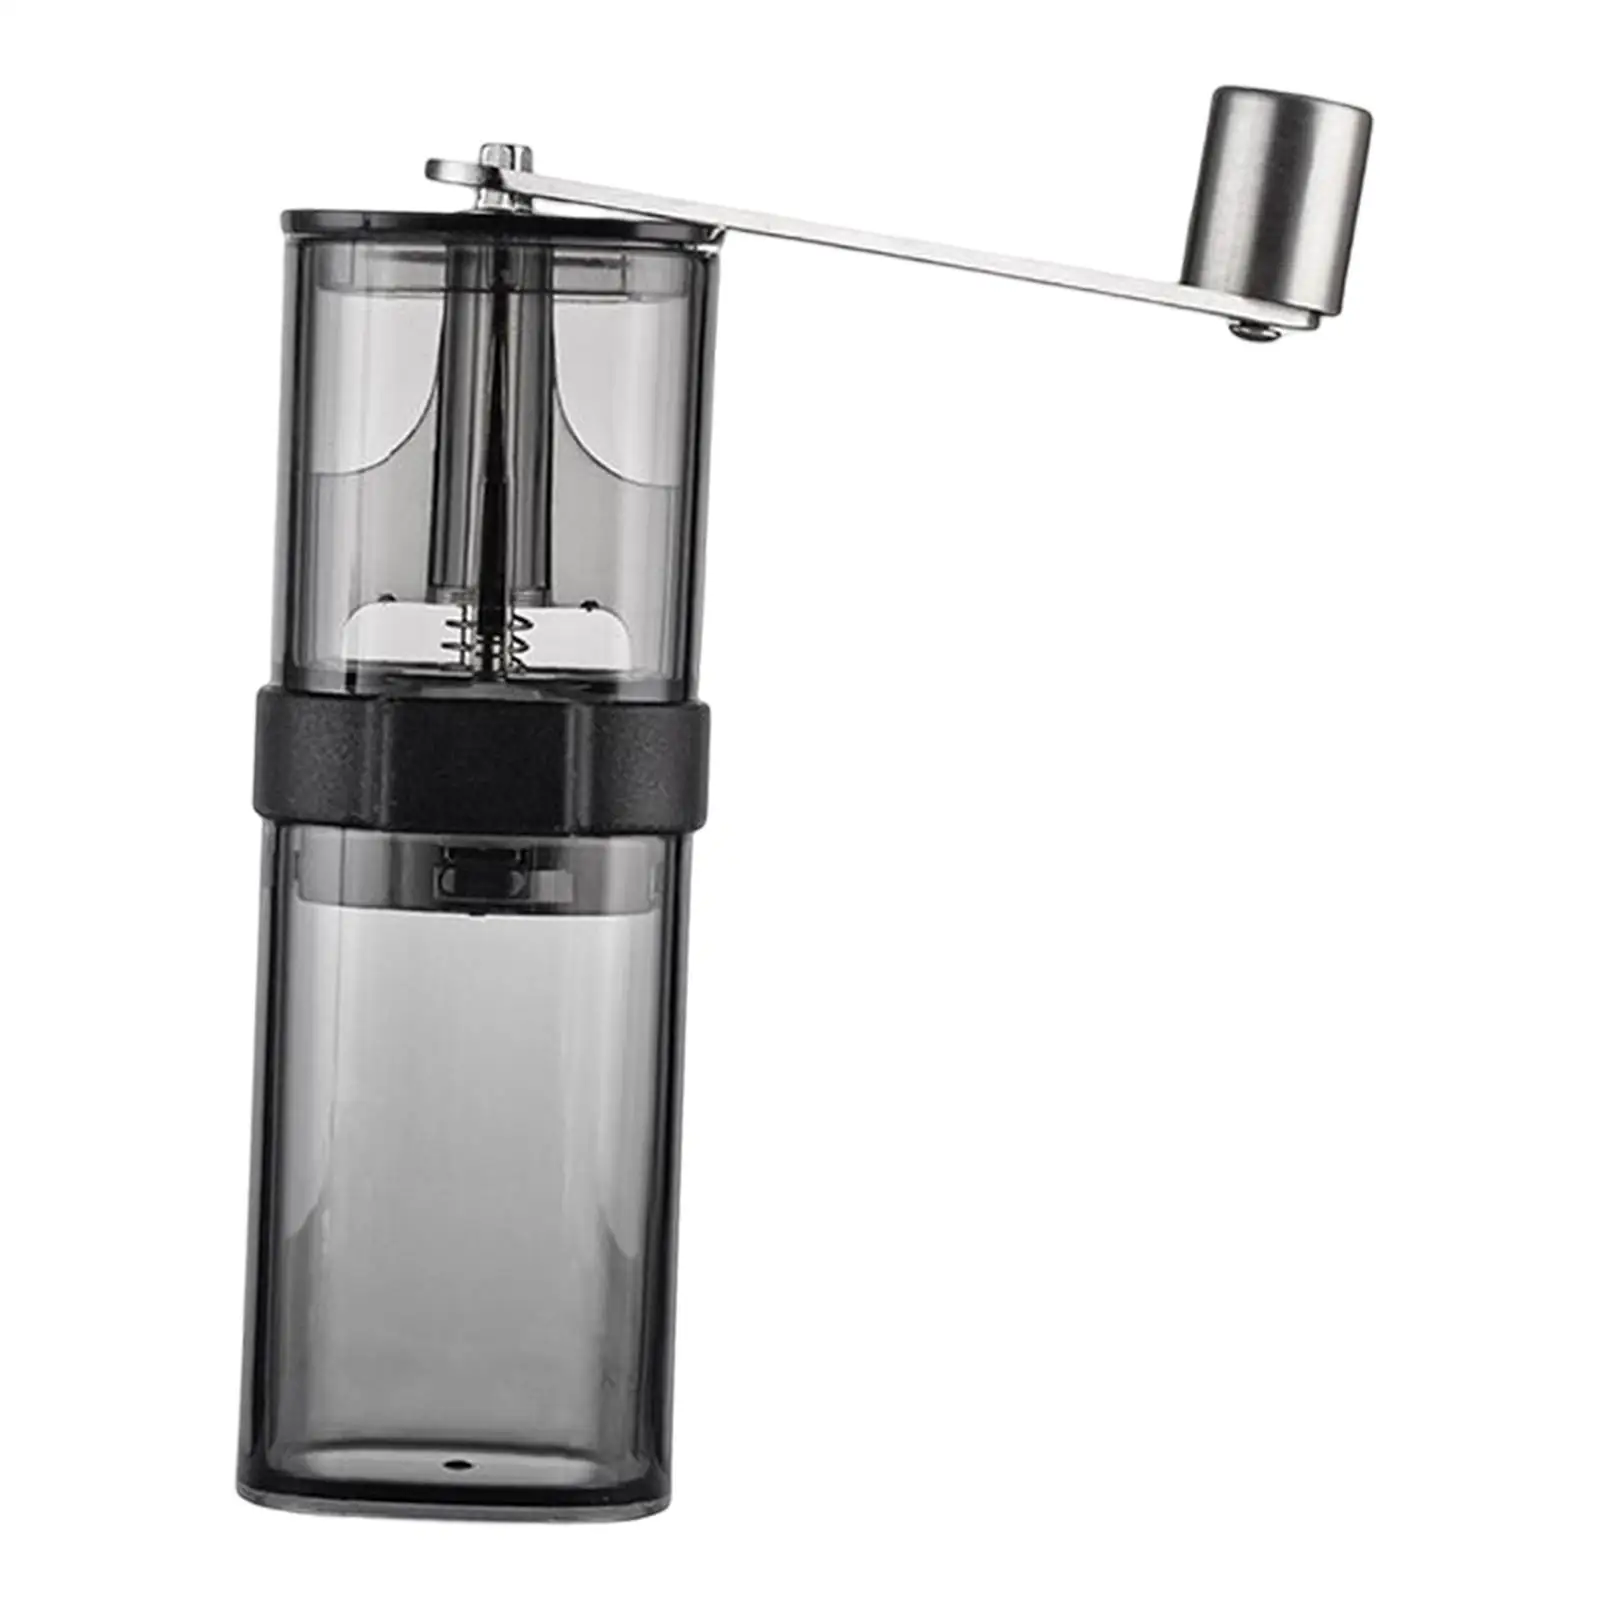 Coffee Grinder Hand Crank Manual Portable Manual Grinder for Home